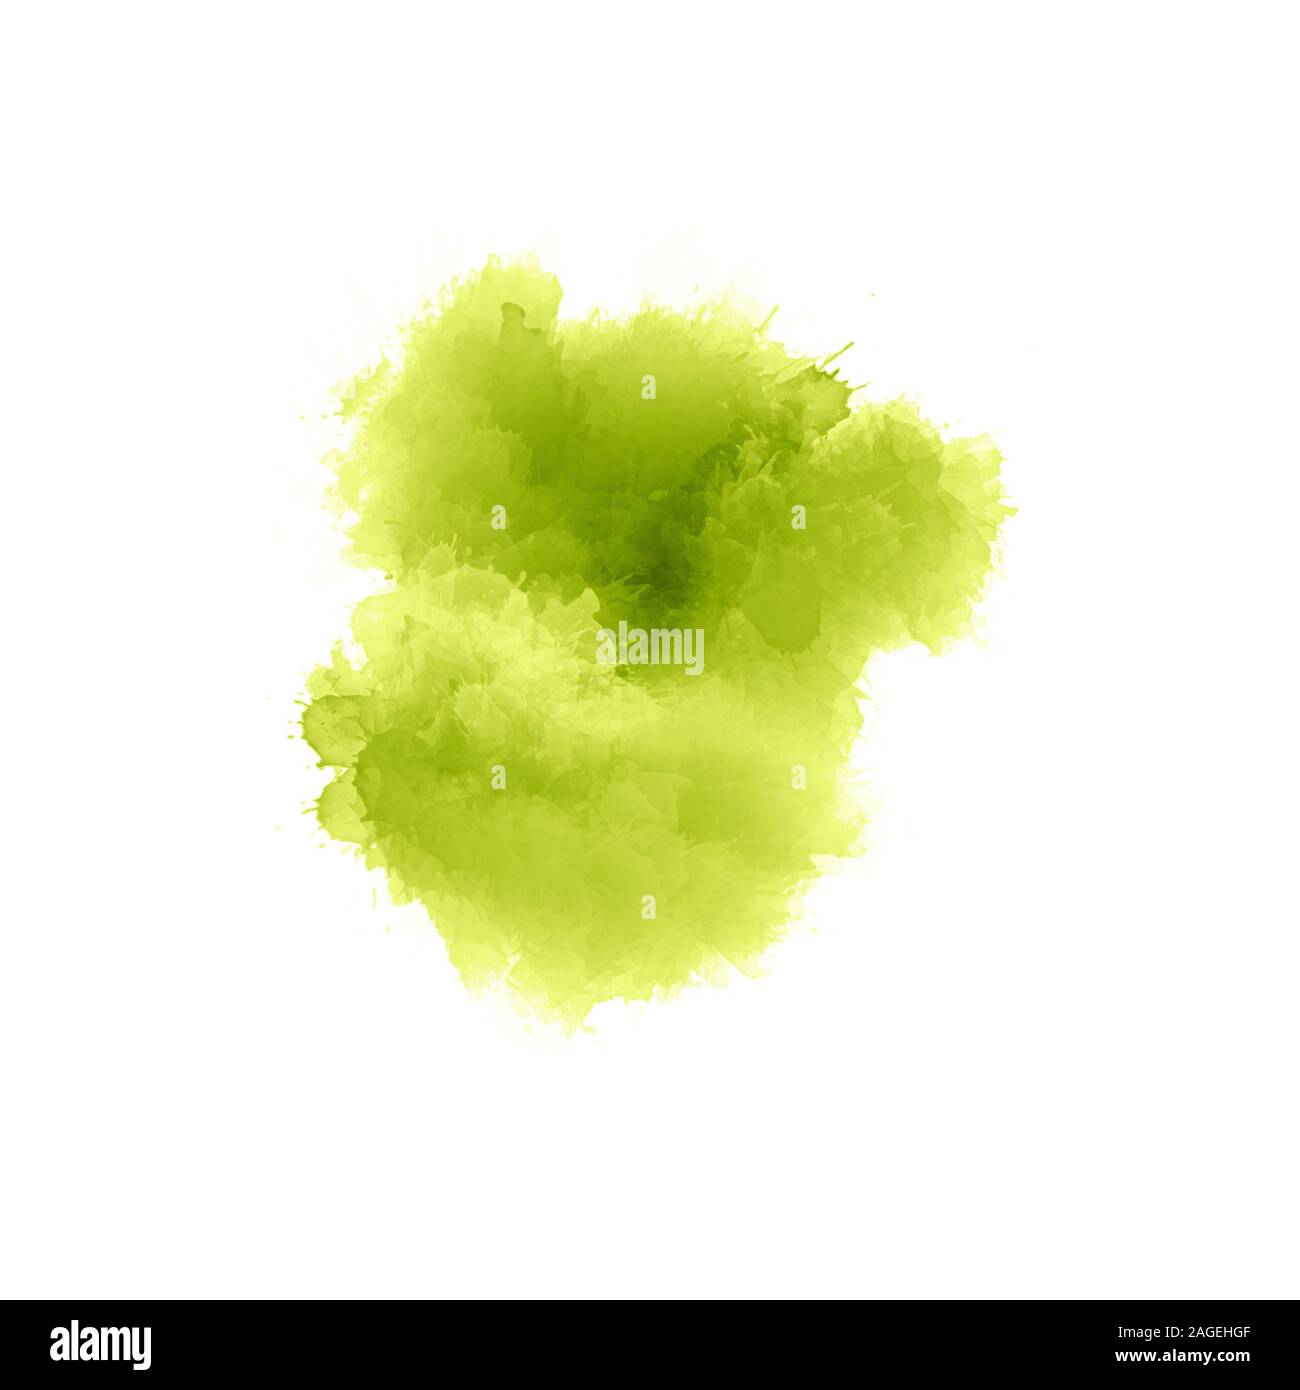 Artistic painting in shades of light green. Colorful paint splashes. Watercolor shape on white background. Modern abstract art. Stock Photo